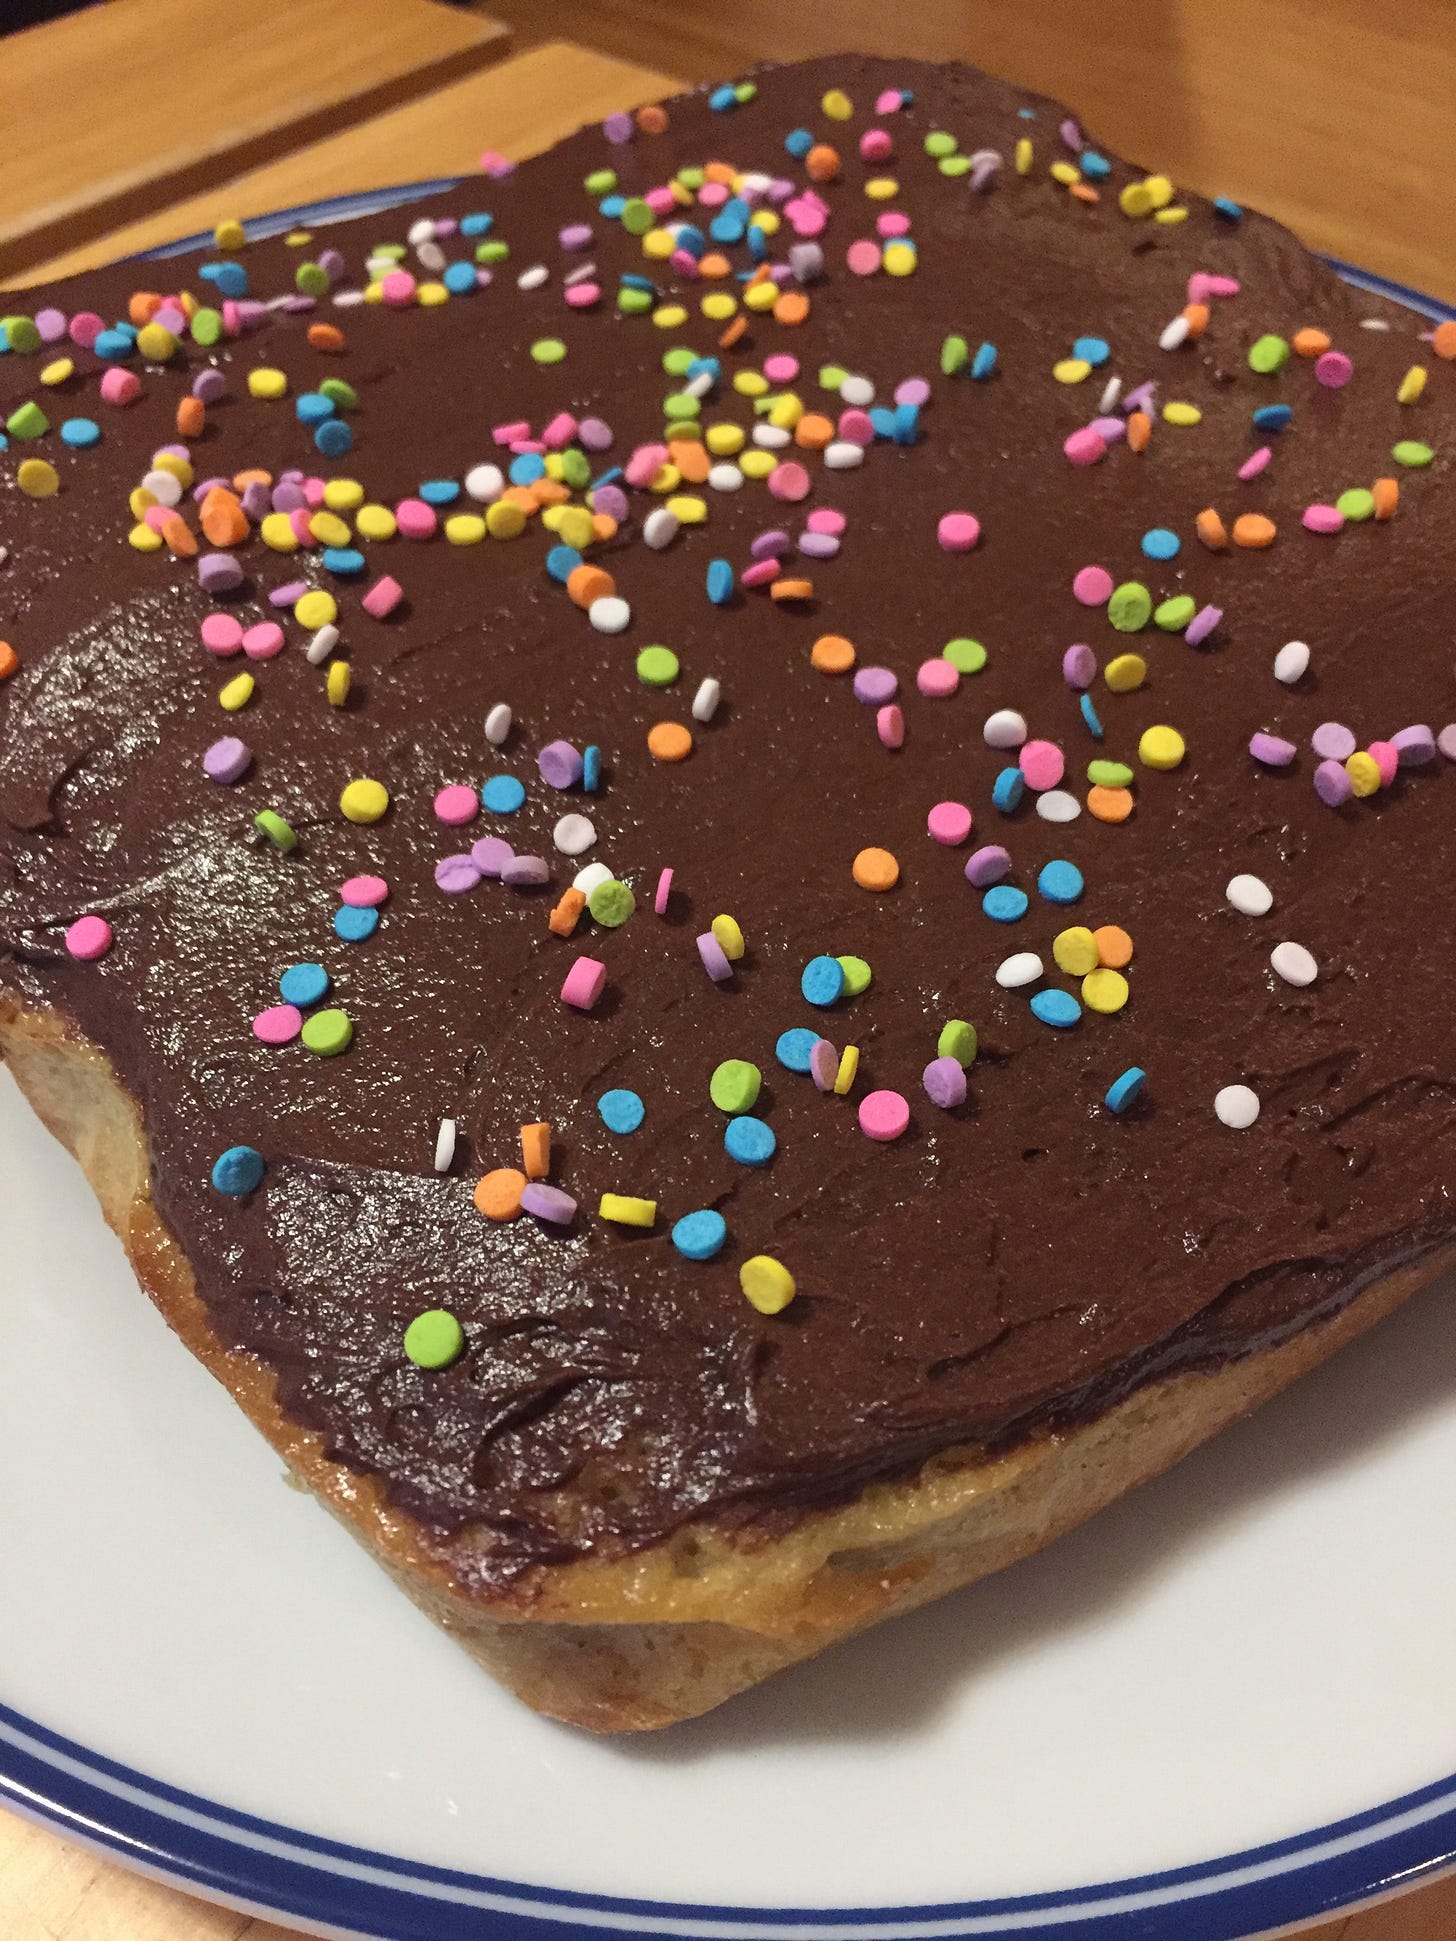 On a white plate, a square yellow cake with a layer of glossy chocolate icing. Large circular sprinkles in bright colours are scattered across the top.